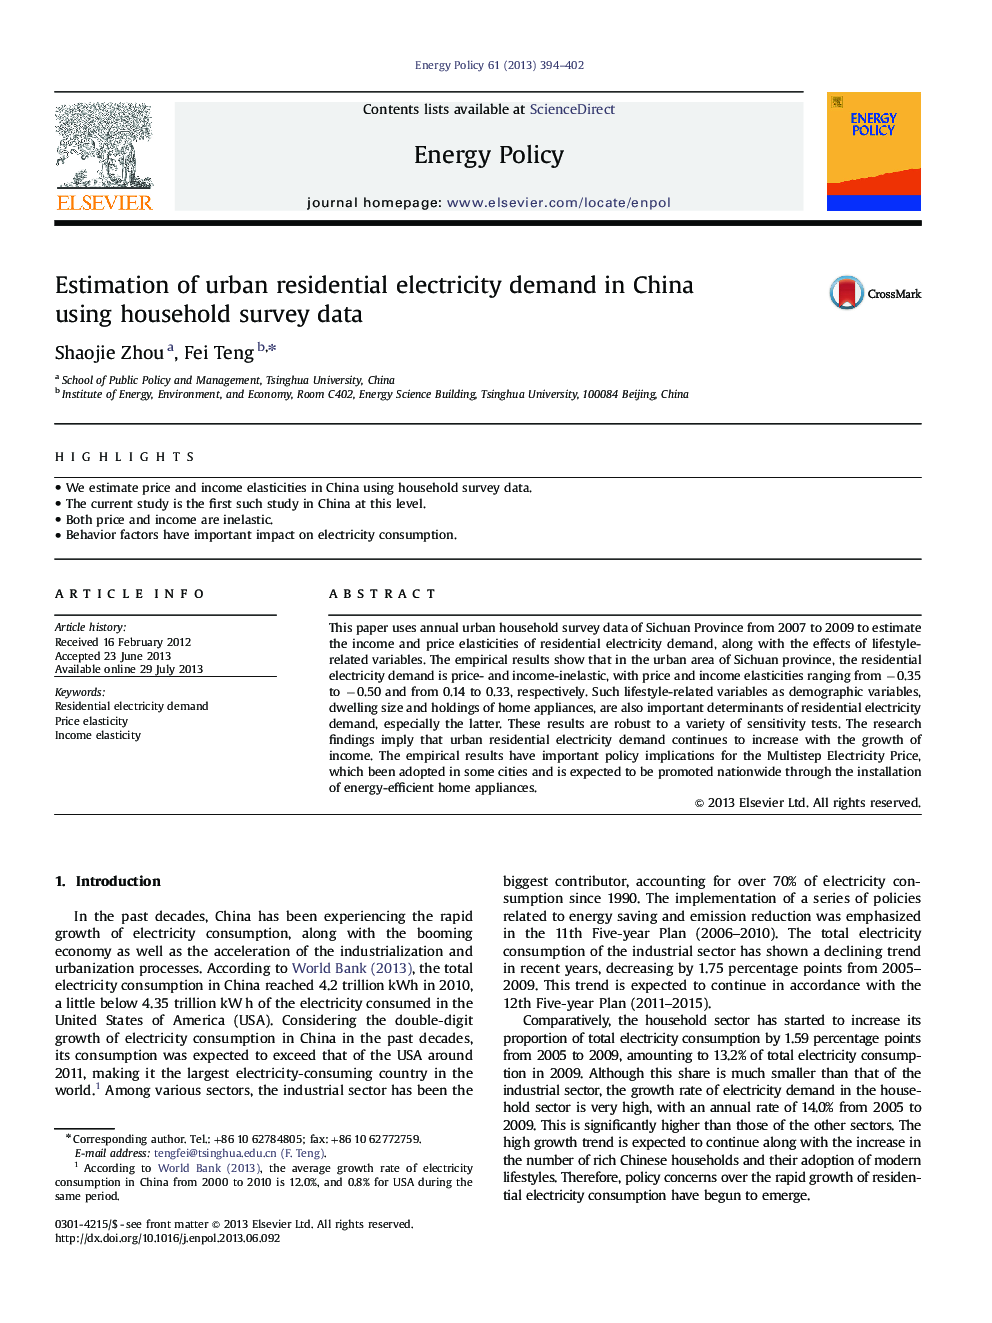 Estimation of urban residential electricity demand in China using household survey data